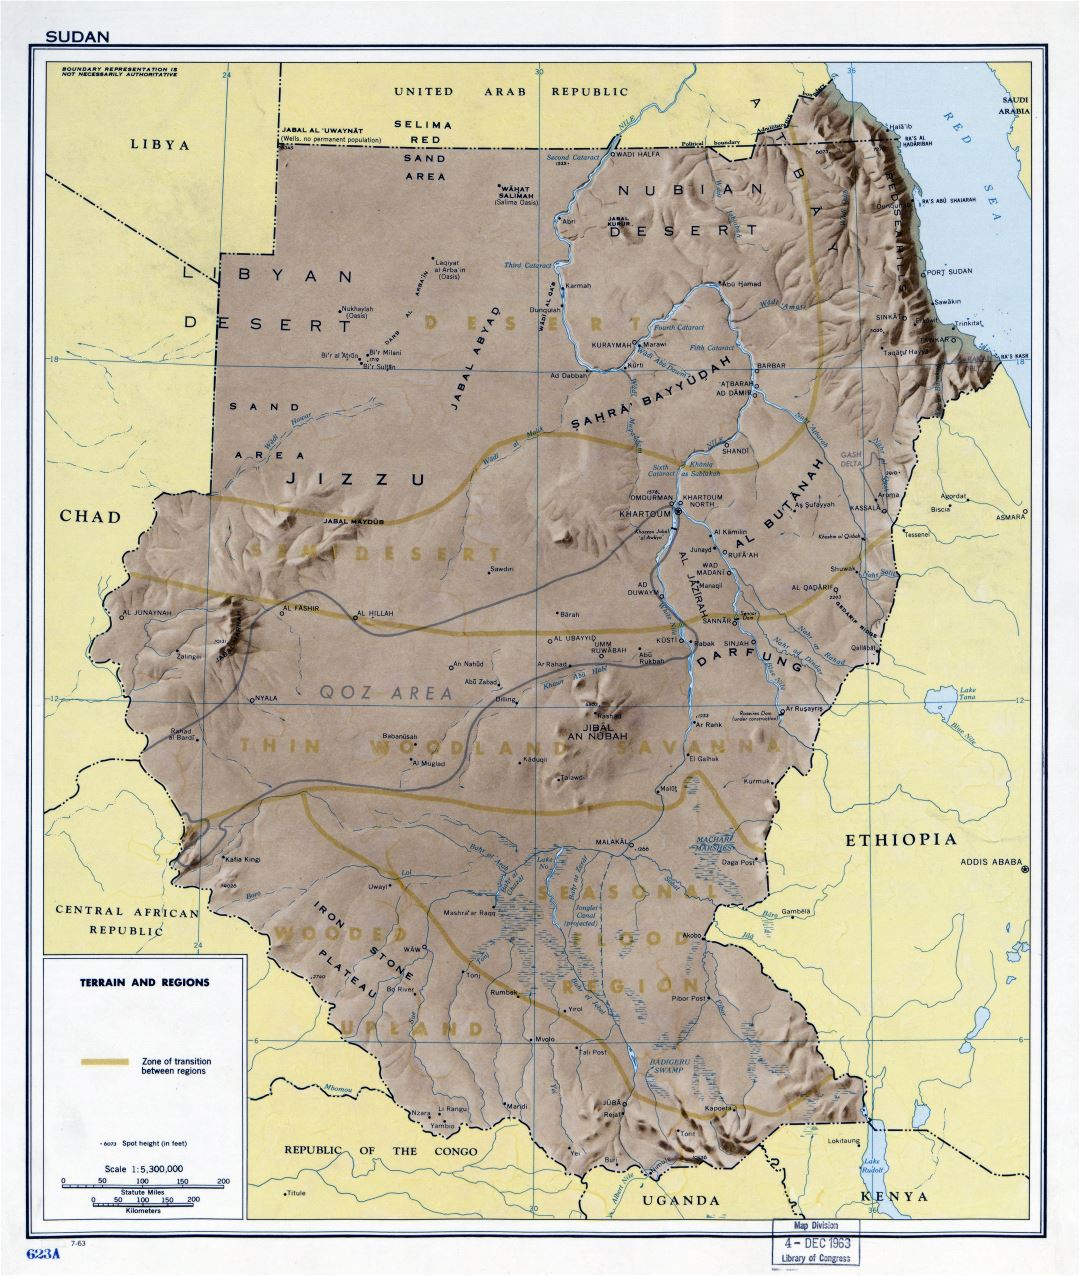 Large scale terrain and regions map of Sudan - 1963